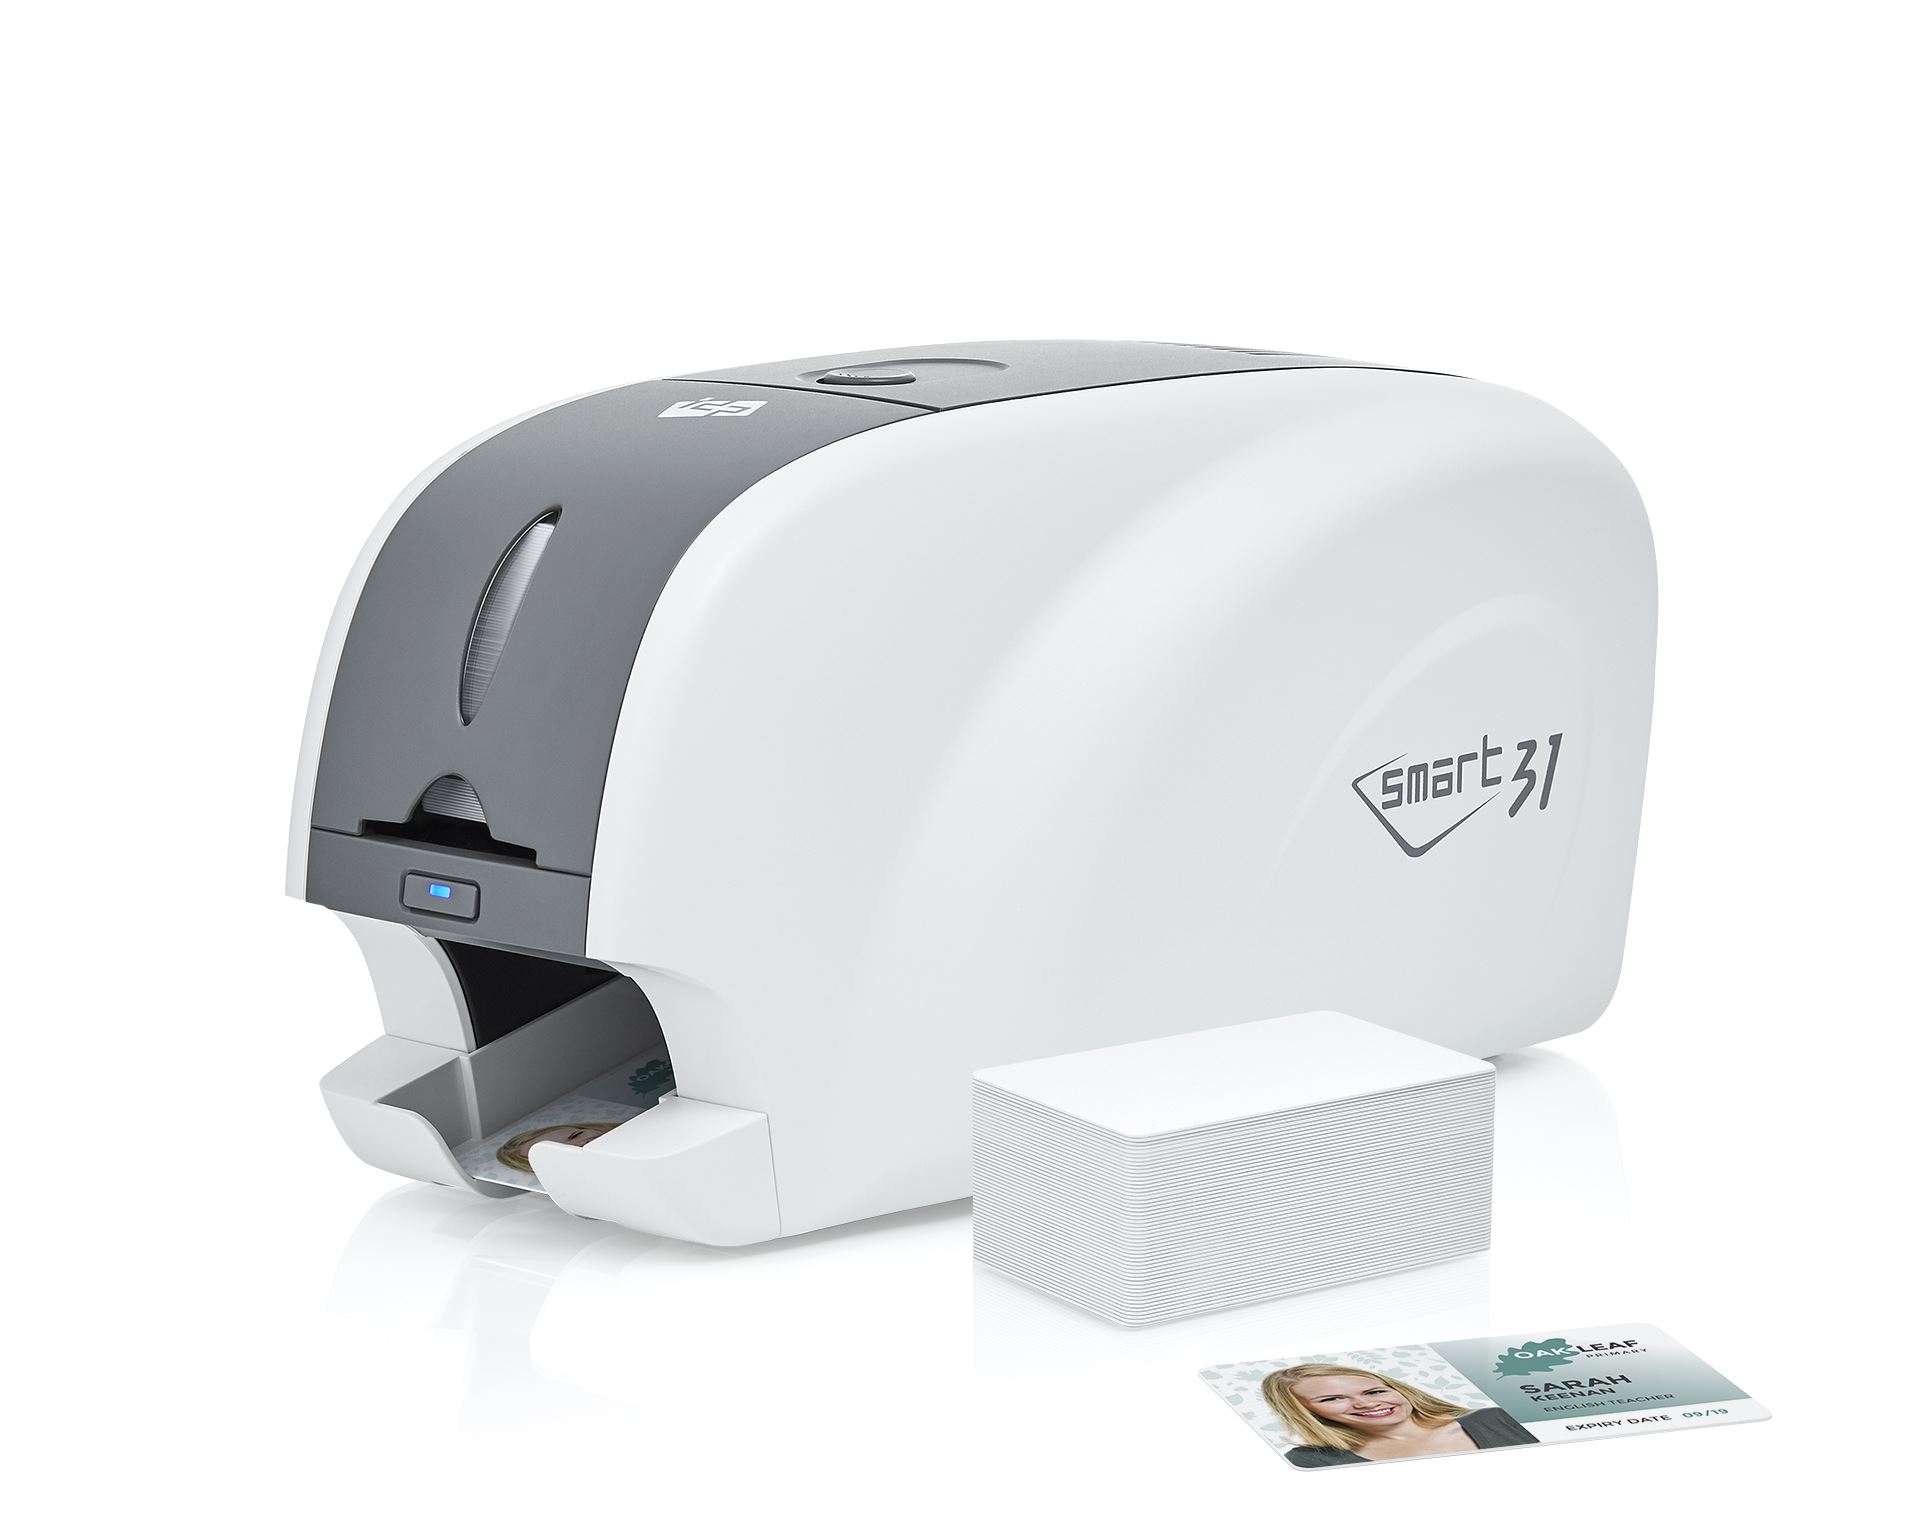 id card printer without needing any